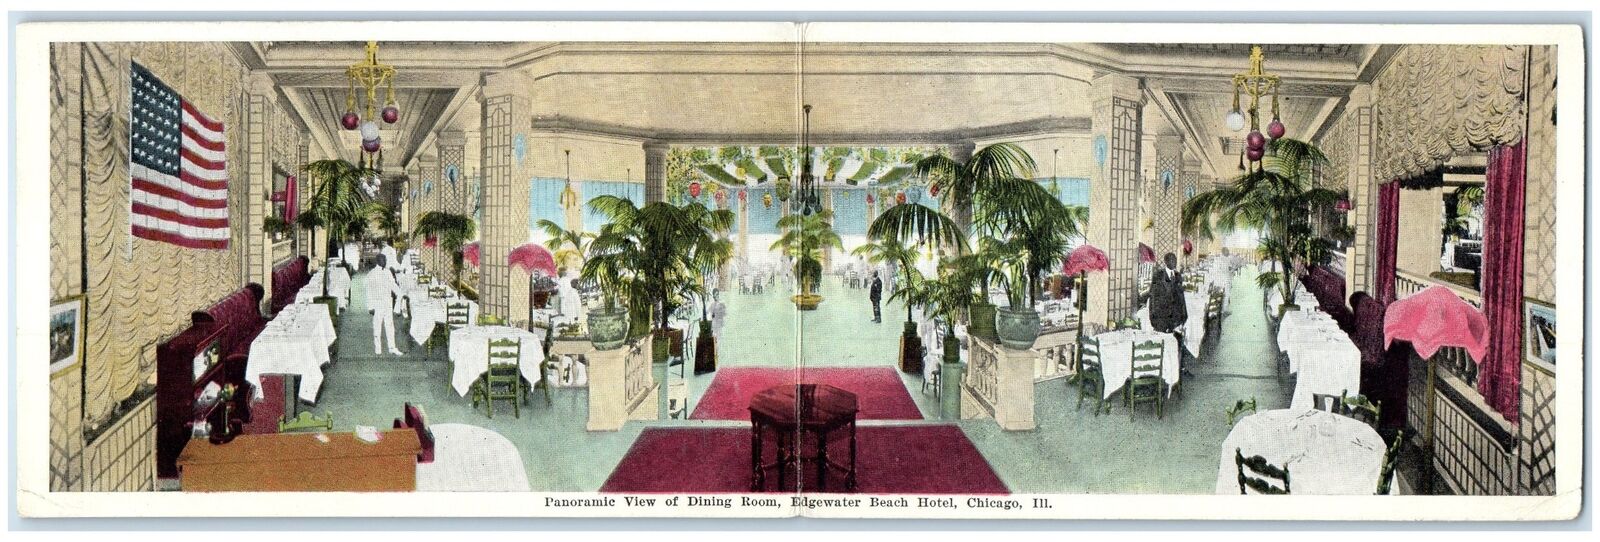 c1920's Panoramic View Dining Room Edgewater Hotel Chicago Illinois IL Postcard